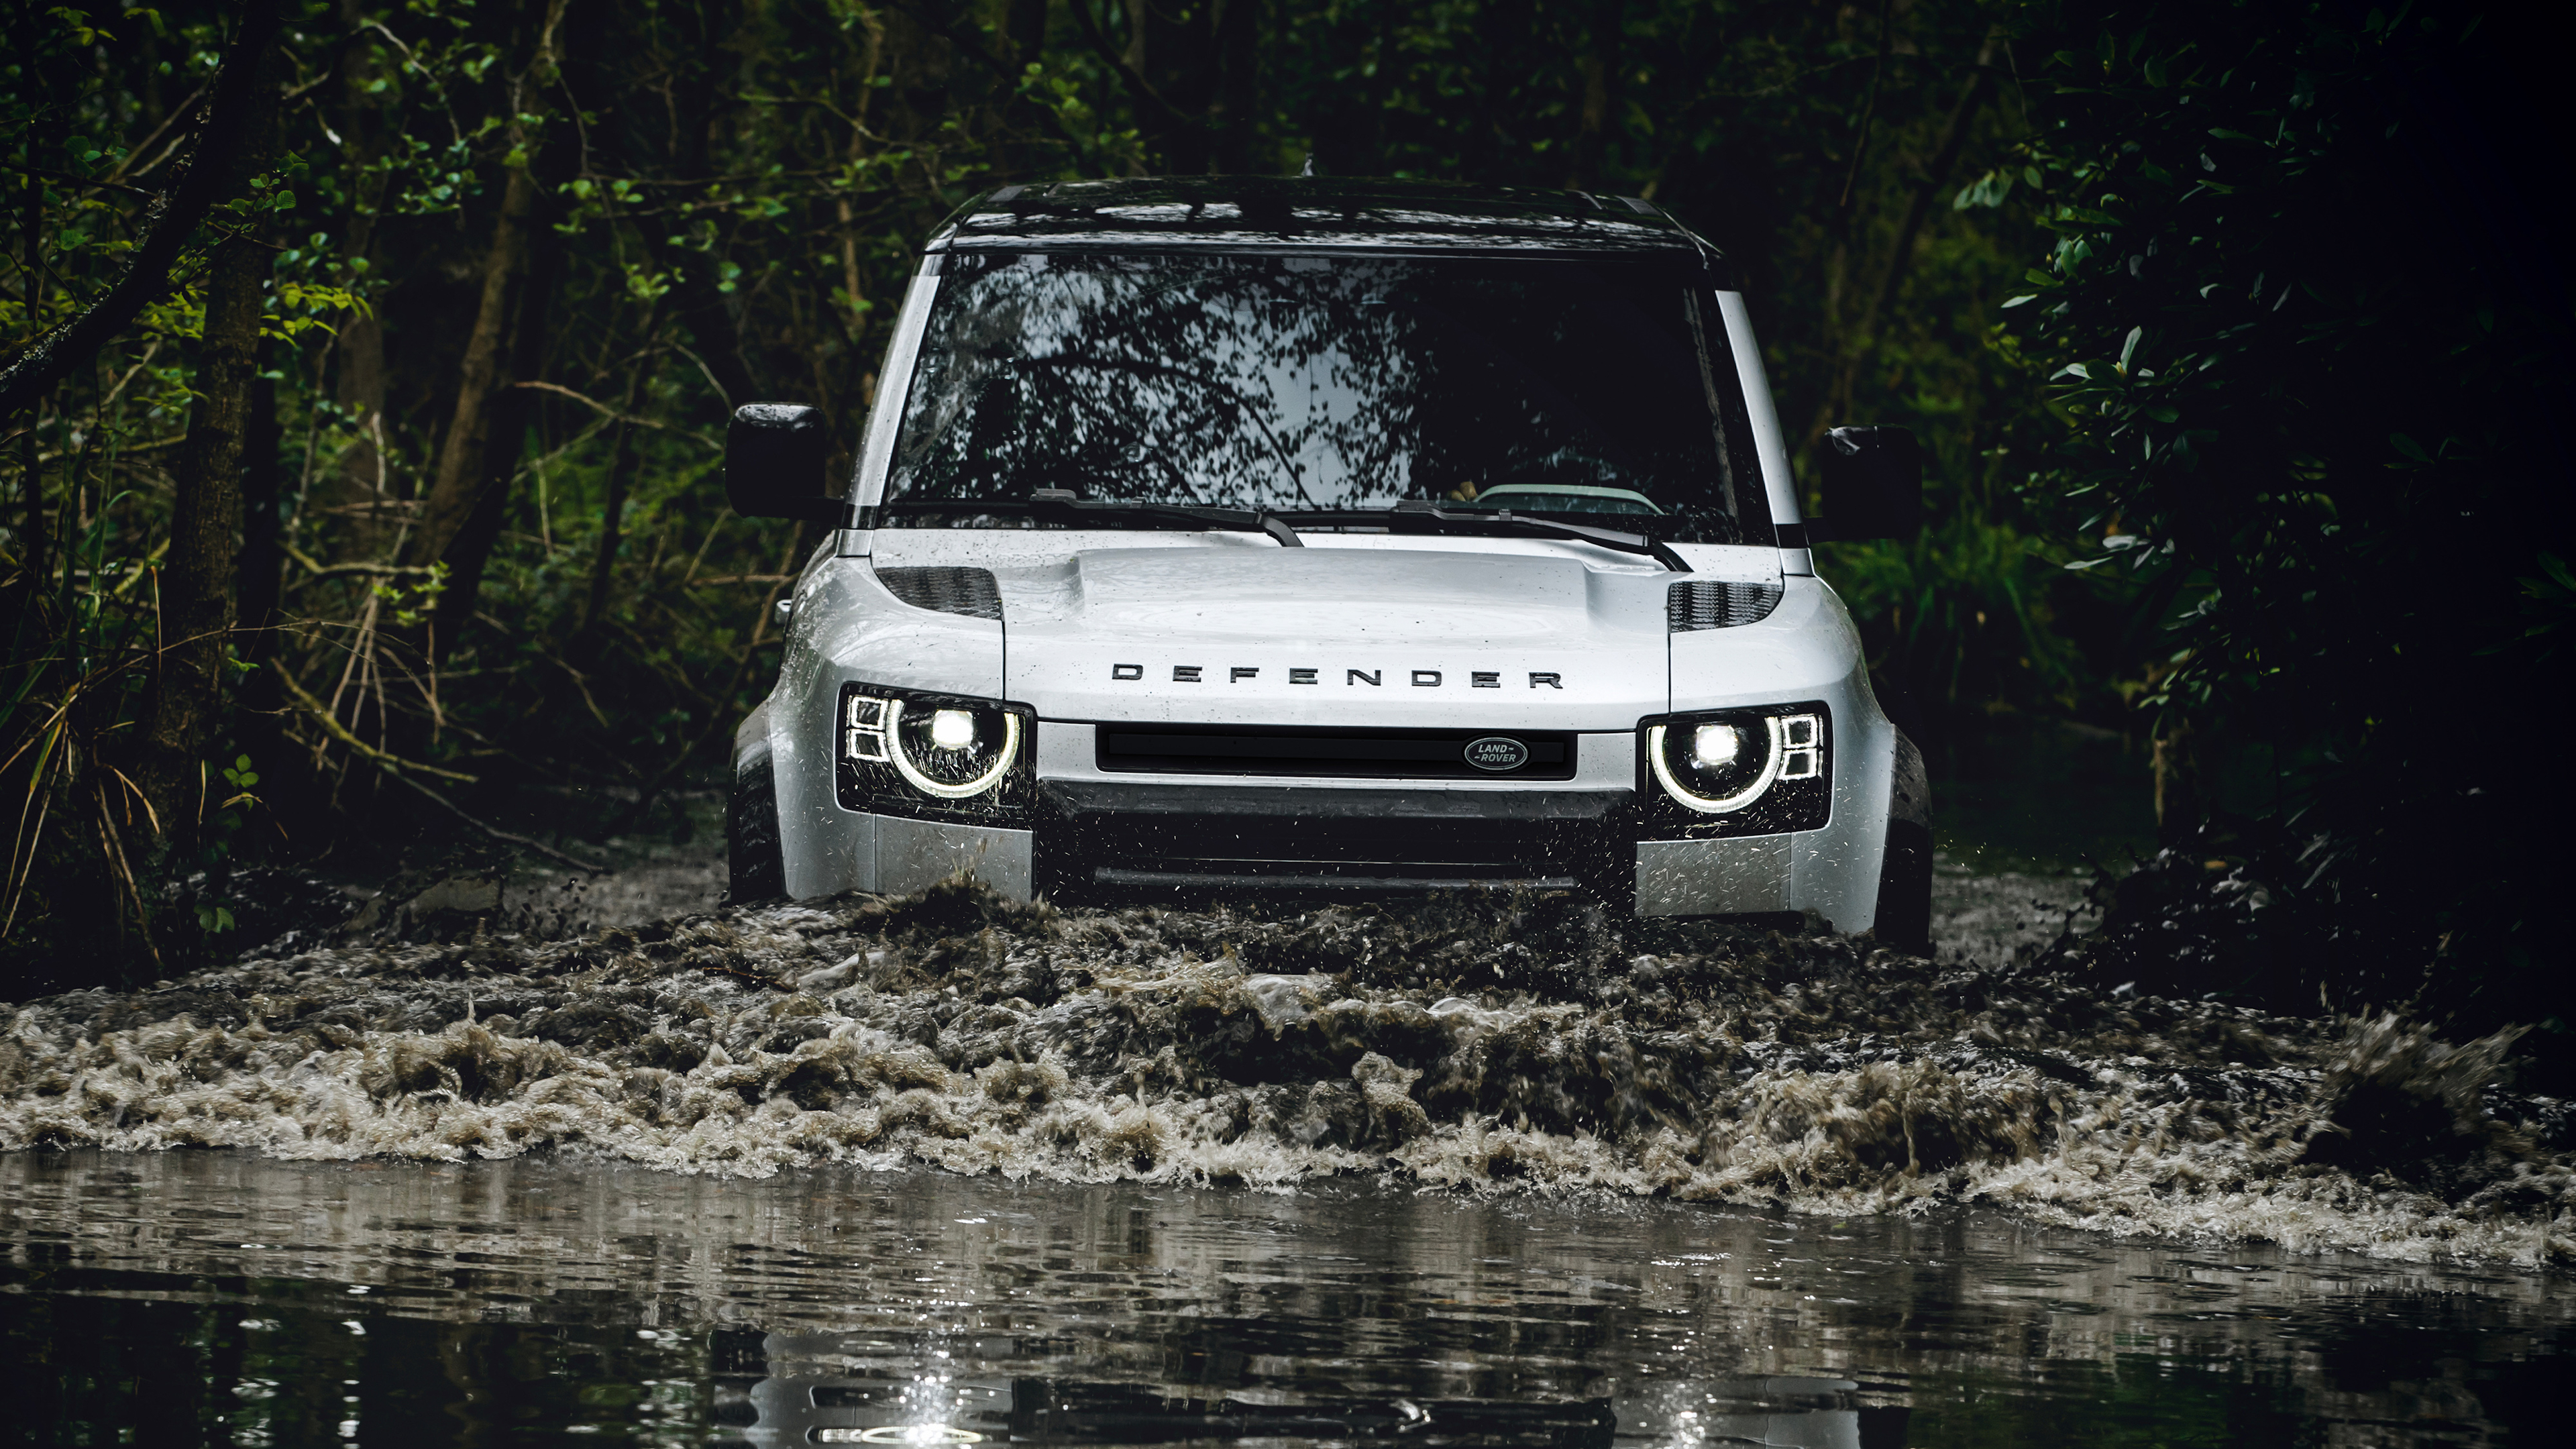 General 3840x2160 Land Rover Land Rover Defender car vehicle offroad forest river British cars